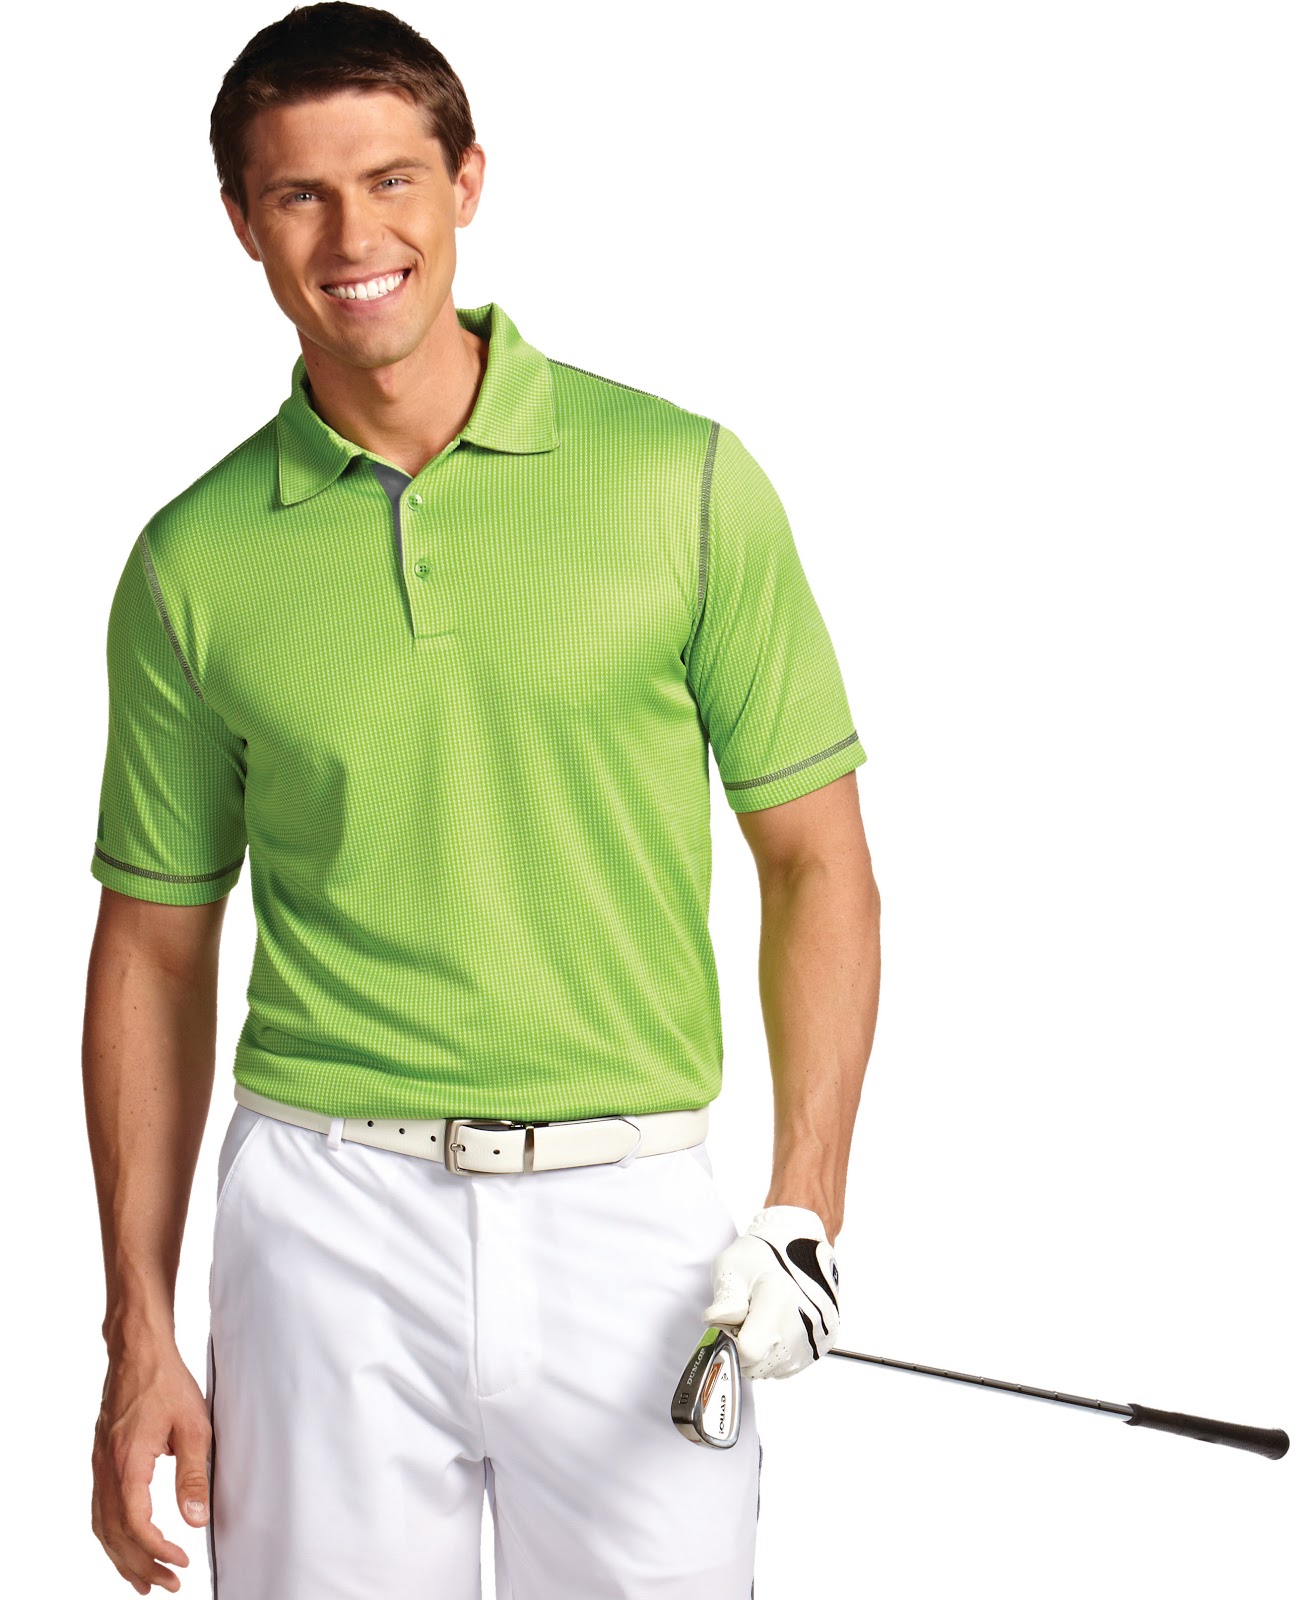 Golfing Magazine: The Antigua Spring Men's Performance Golf Collections ...